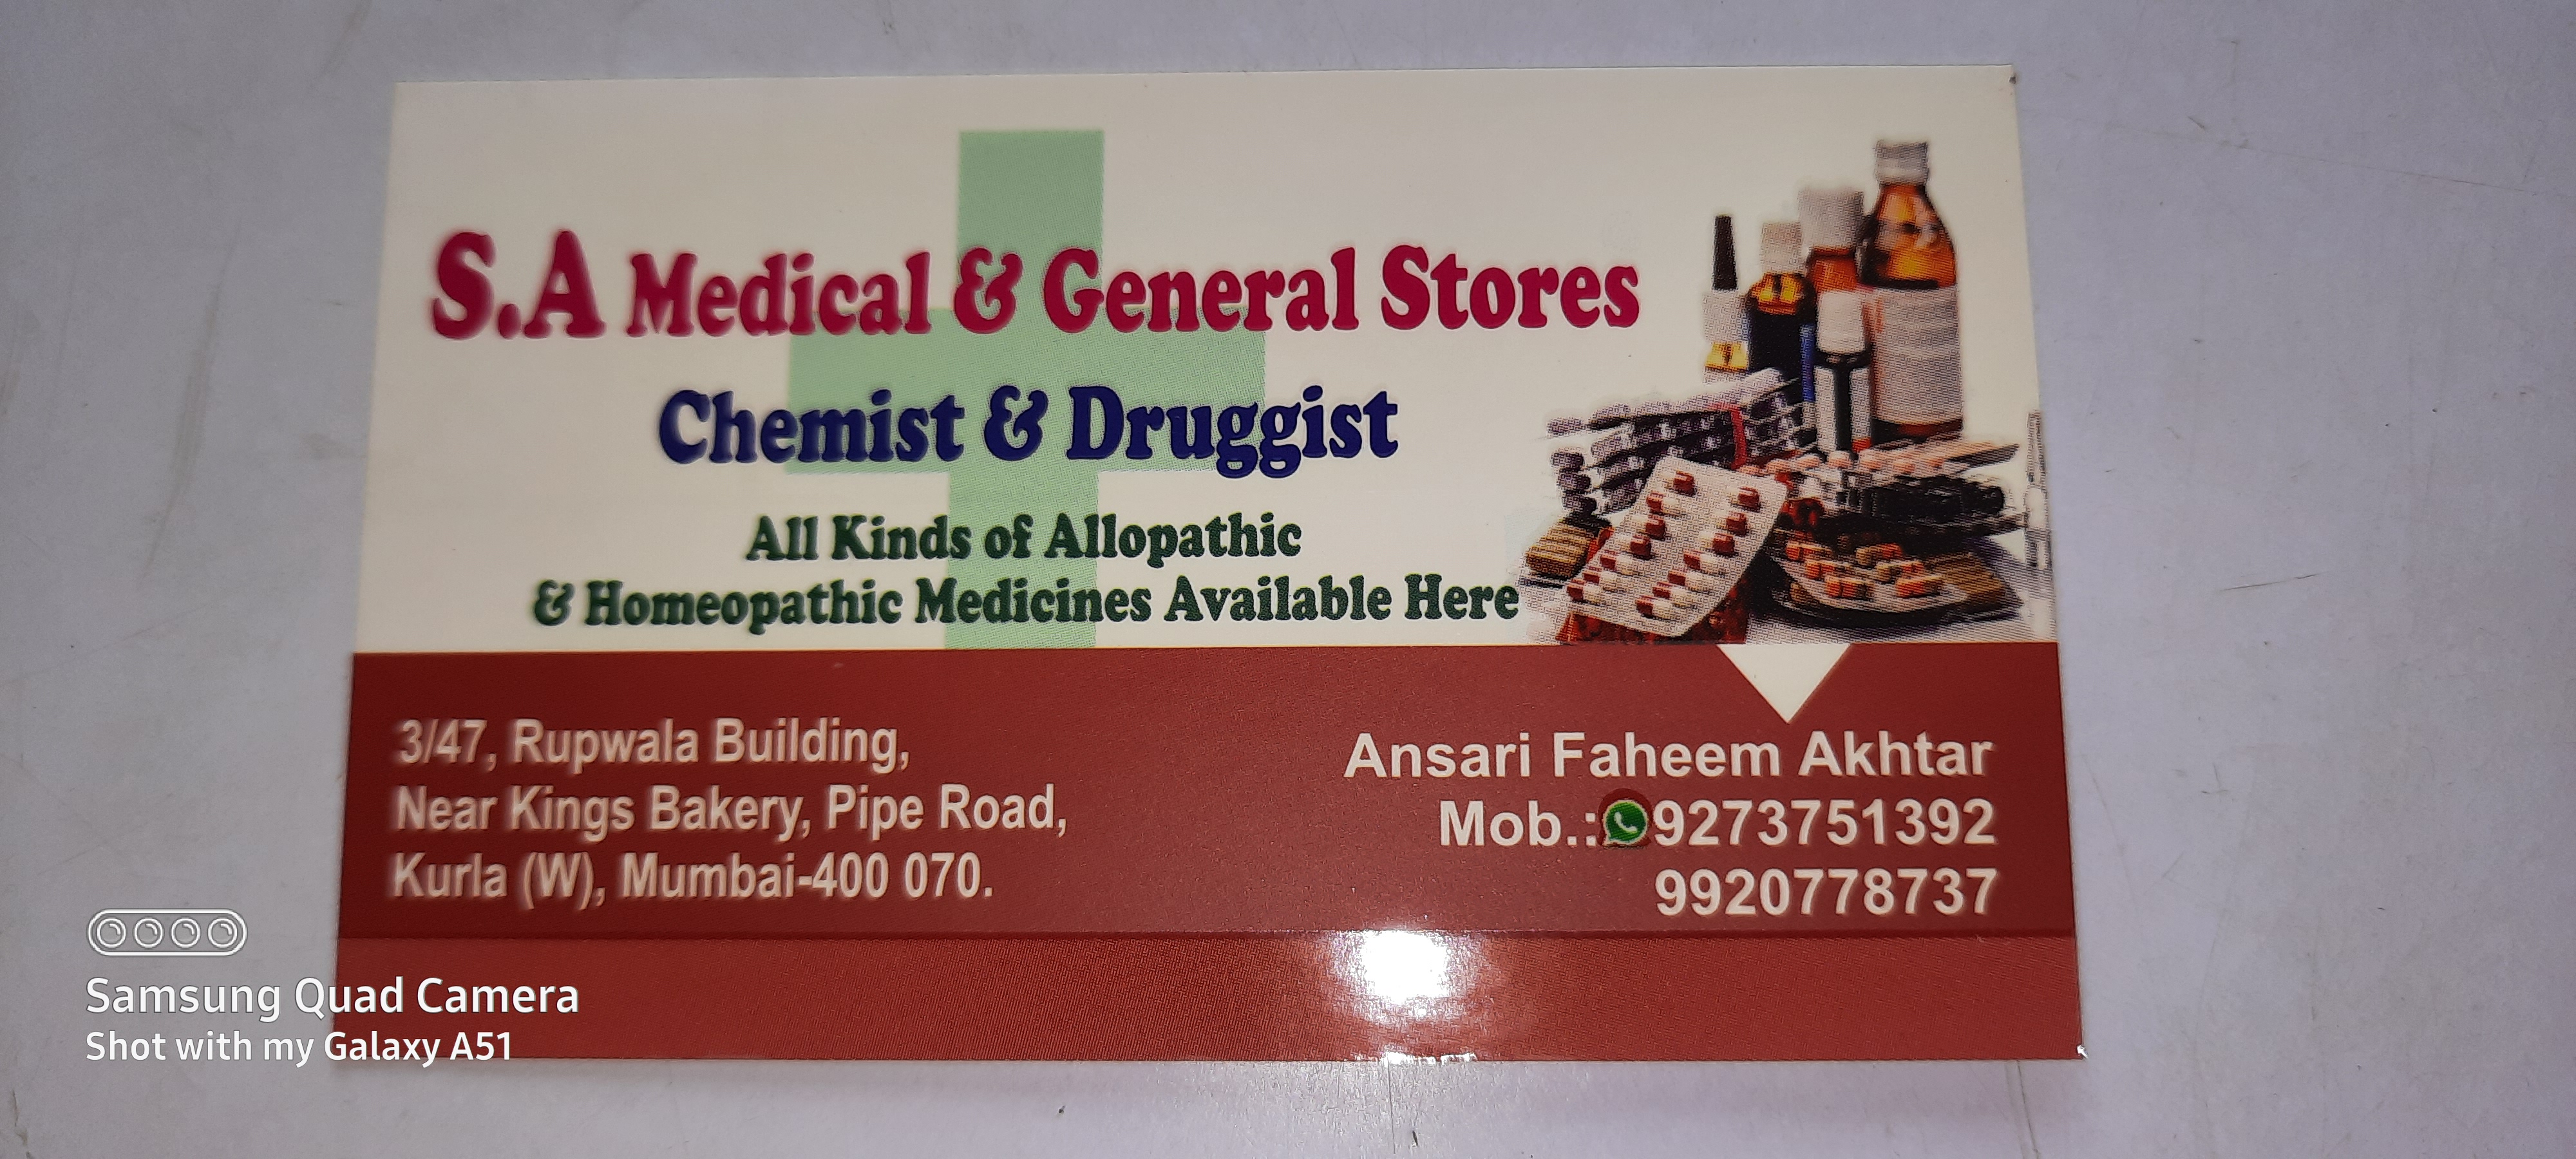 S A MEDICAL & GENERAL STORES